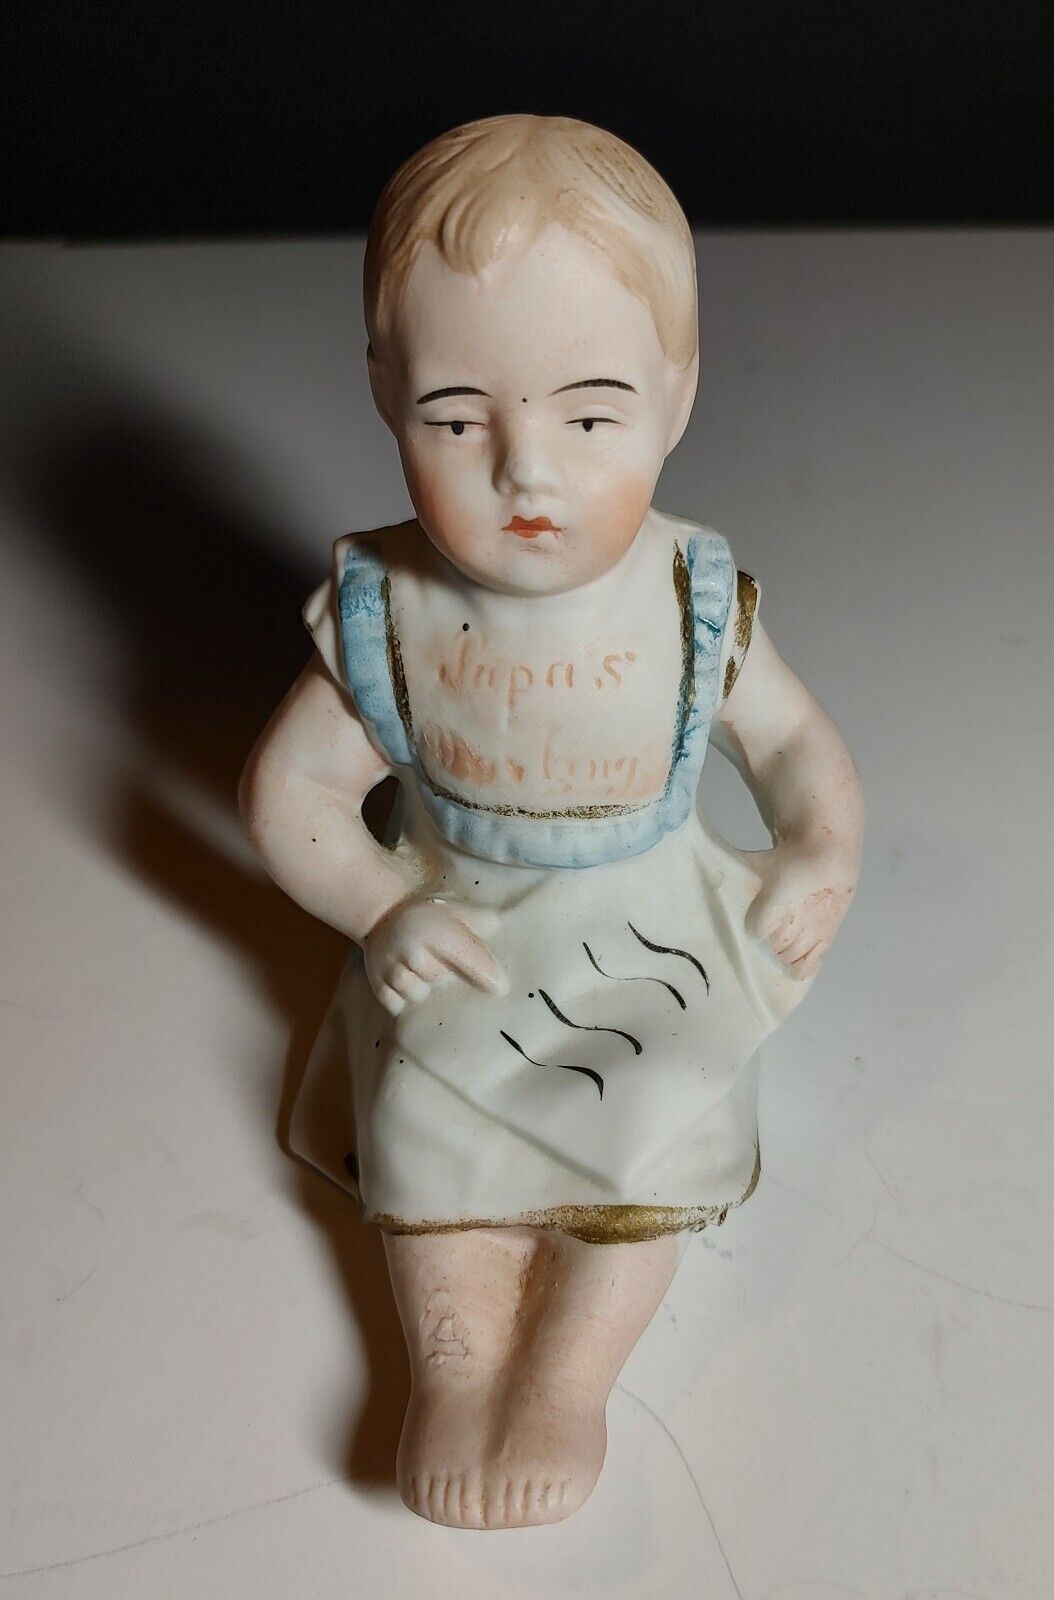 Antique German Hand Painted Piano Baby Papas Darling Figurine